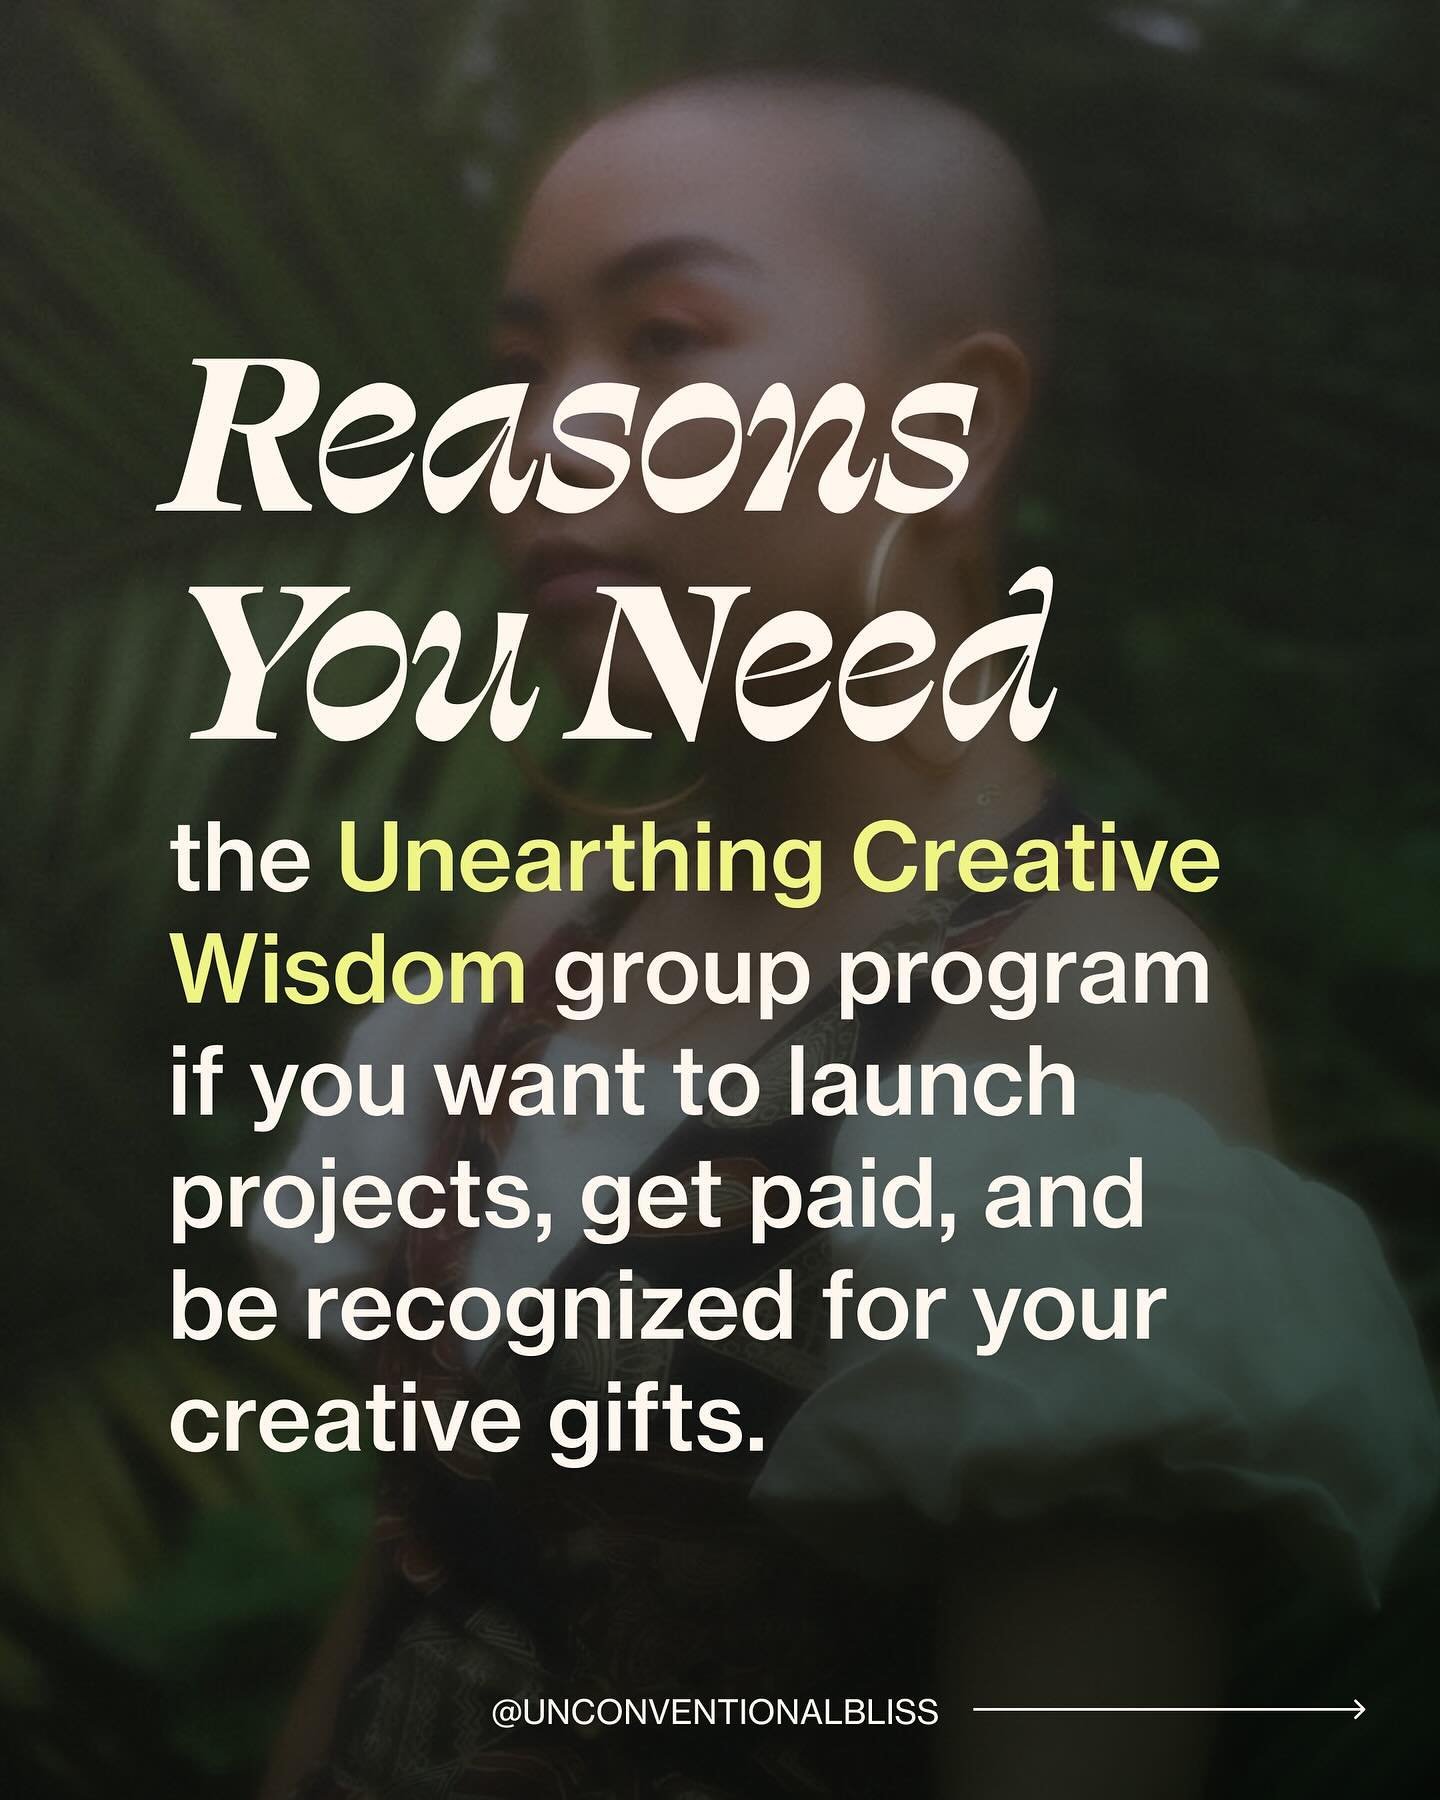 ☎️ Calling all creatives, designers, multi-passionate beings... ☎️

I want to lovingly check in: 

Are you in the same place as you were one year ago, or do you feel further behind as a creative? 

Maybe your ideas and projects are hiding in laptops,